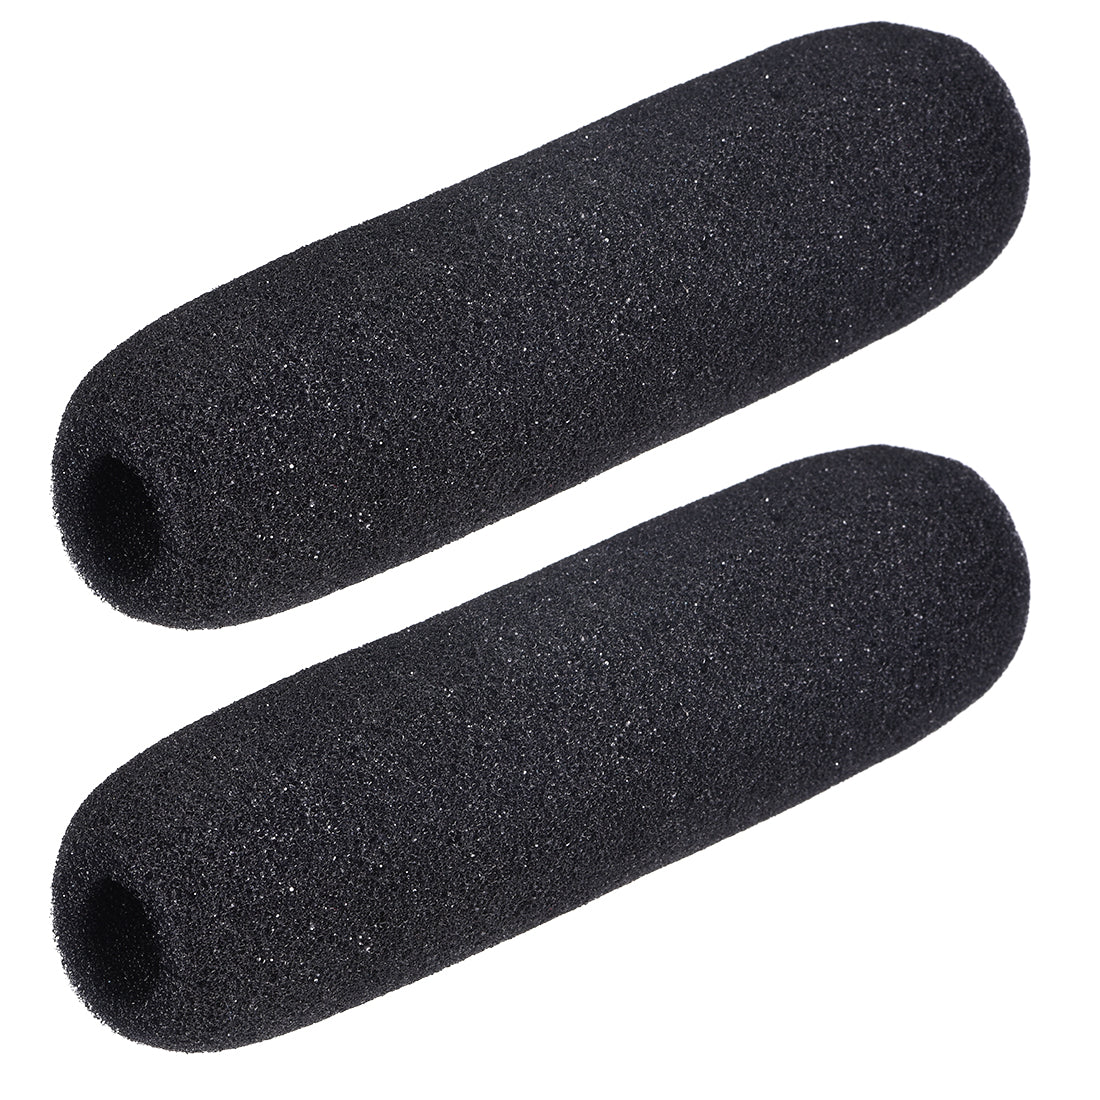 uxcell Uxcell 2PCS Sponge Foam Mic Cover Interview Microphone Windscreen Shield Protection Black 146mm Long